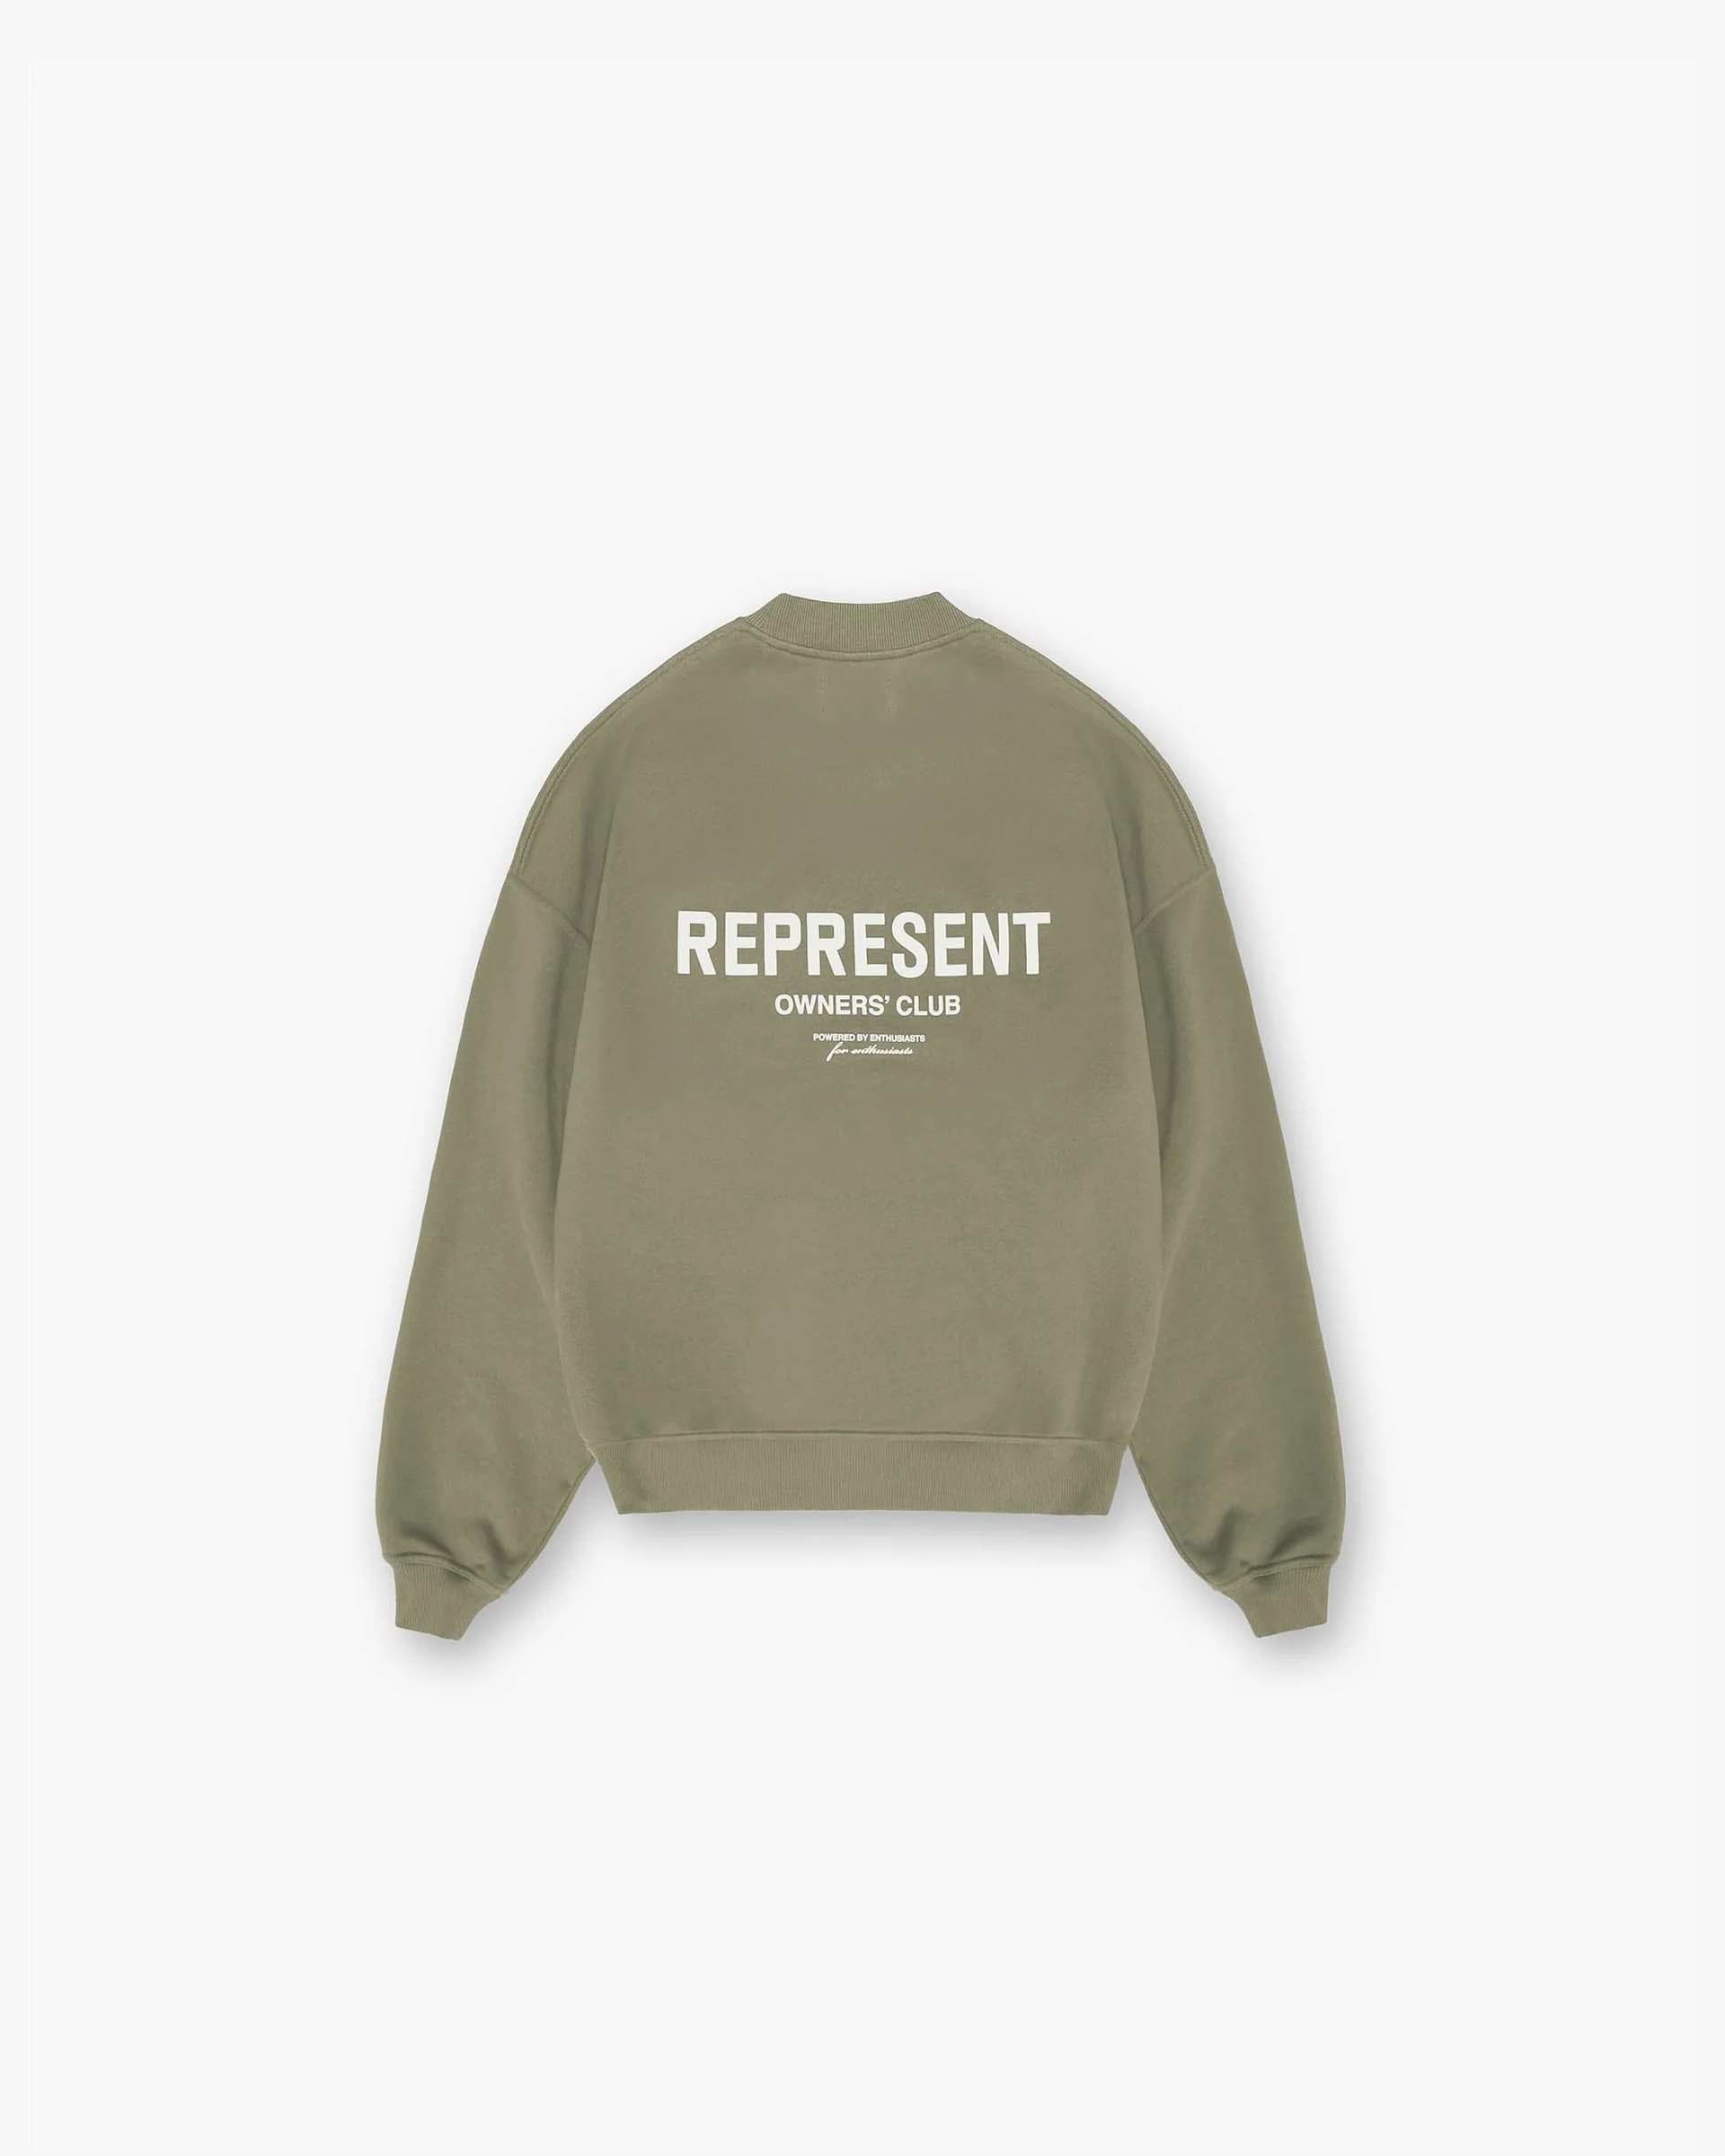 Represent Owners Club Sweater - Olive